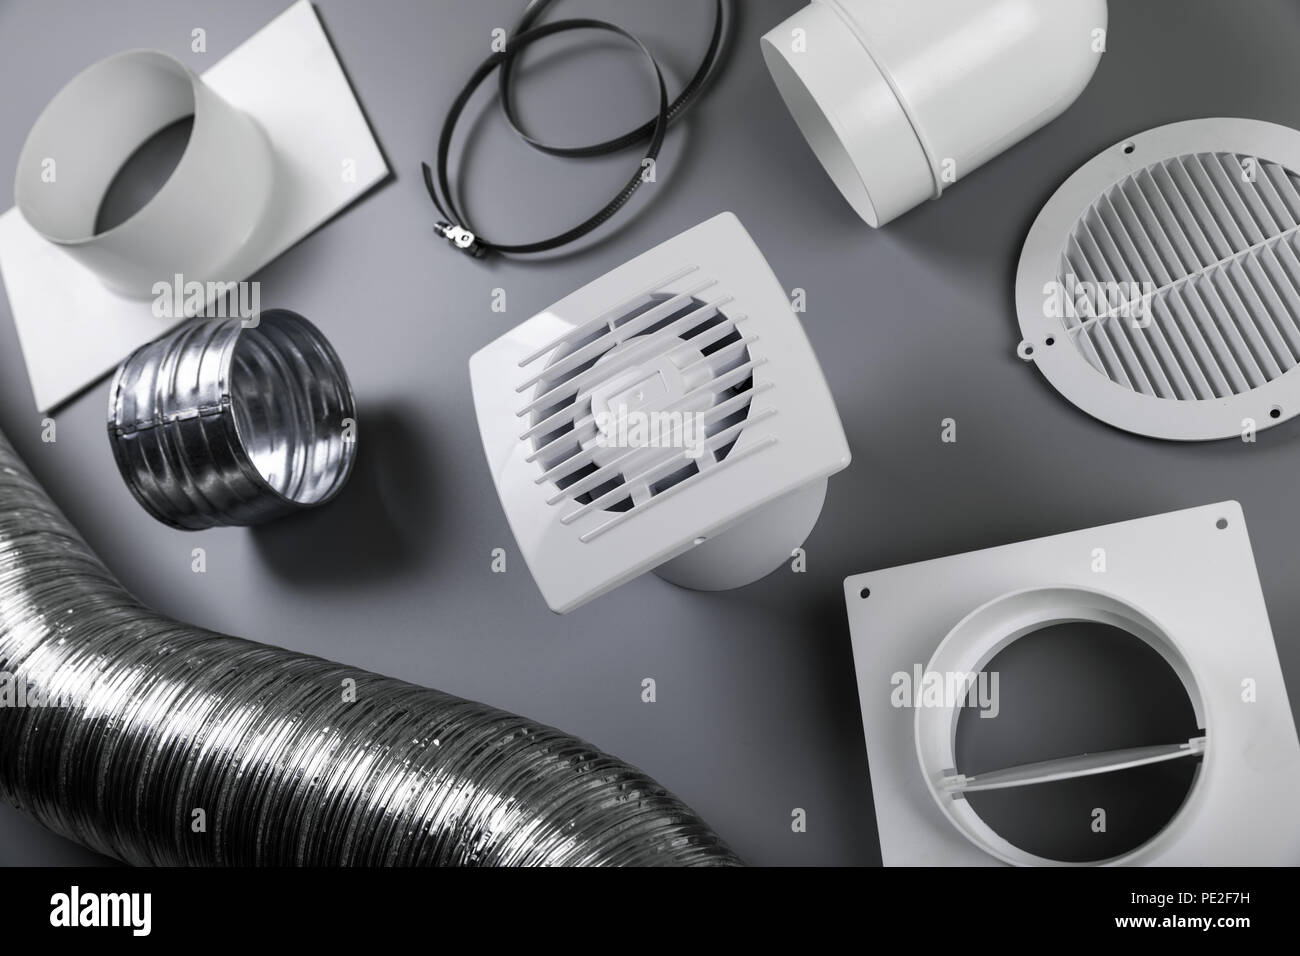 group of ventilation system objects on gray background Stock Photo